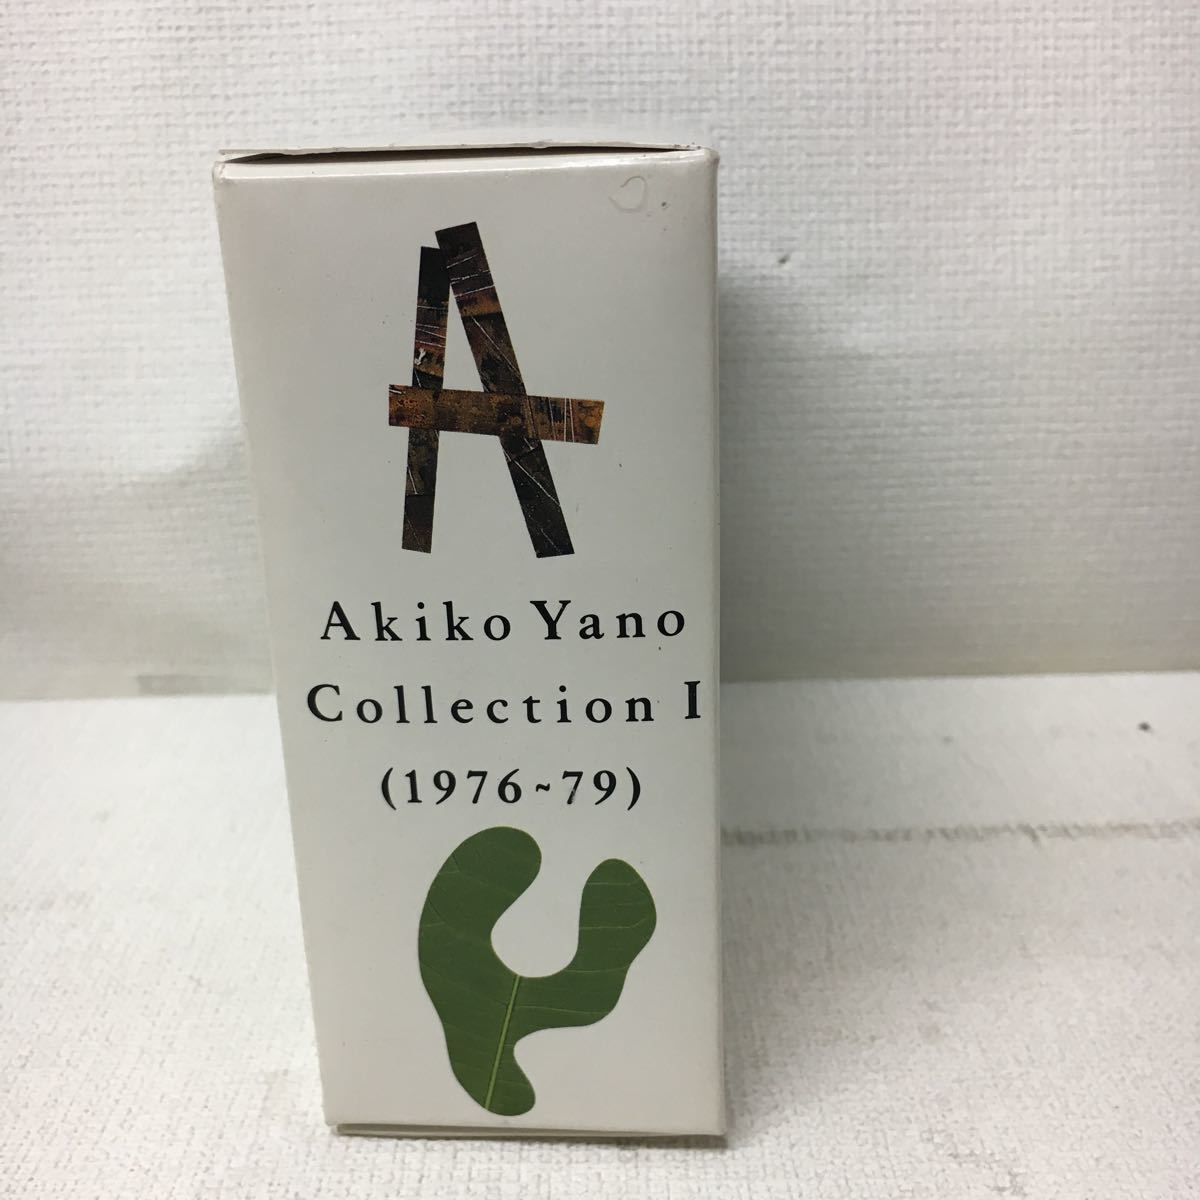 I0225A3 矢野顕子 Akiko Yano Collection Ⅰ 1976〜79 CD 5枚組 音楽 邦楽 JAPANESE GIRL /  長月 神無月 / いろはにこんへいとう 他 product details | Yahoo! Auctions Japan proxy bidding  and shopping service | FROM